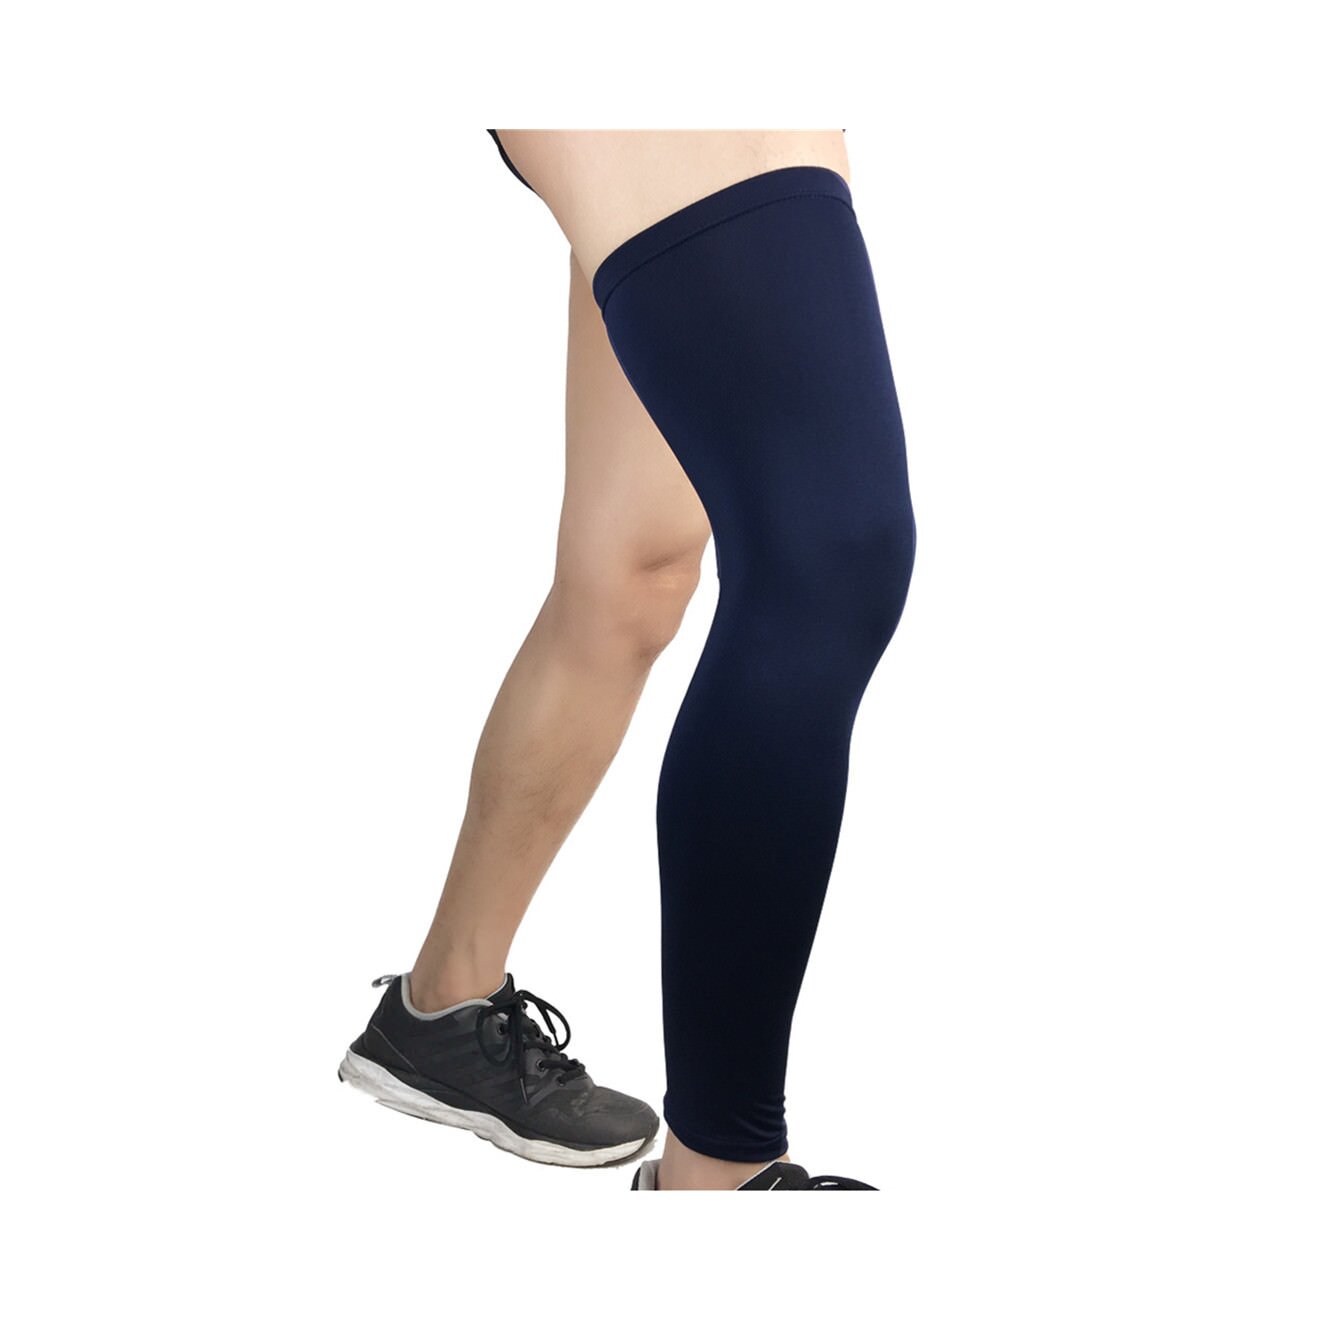 Compression Knee Calf Sleeves Leg Guard Support Antislip Navy Blue L